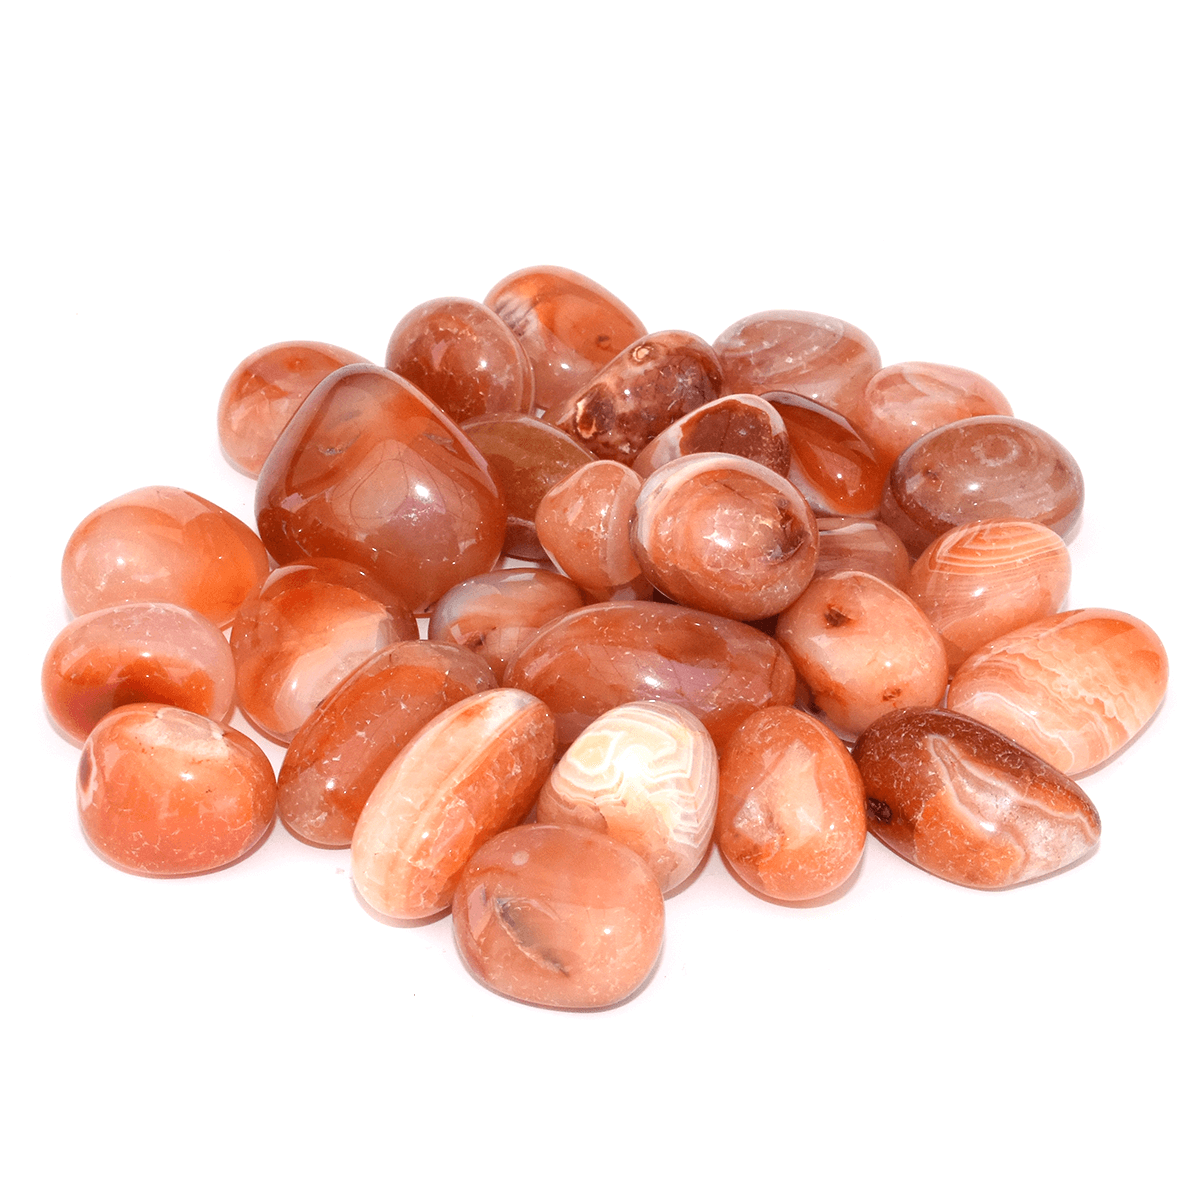 Natural Carnelian Crystal Tumbles Stone for Healing & Crystal Healing Tumbled Stones (Pack of 100 Grams Approx)